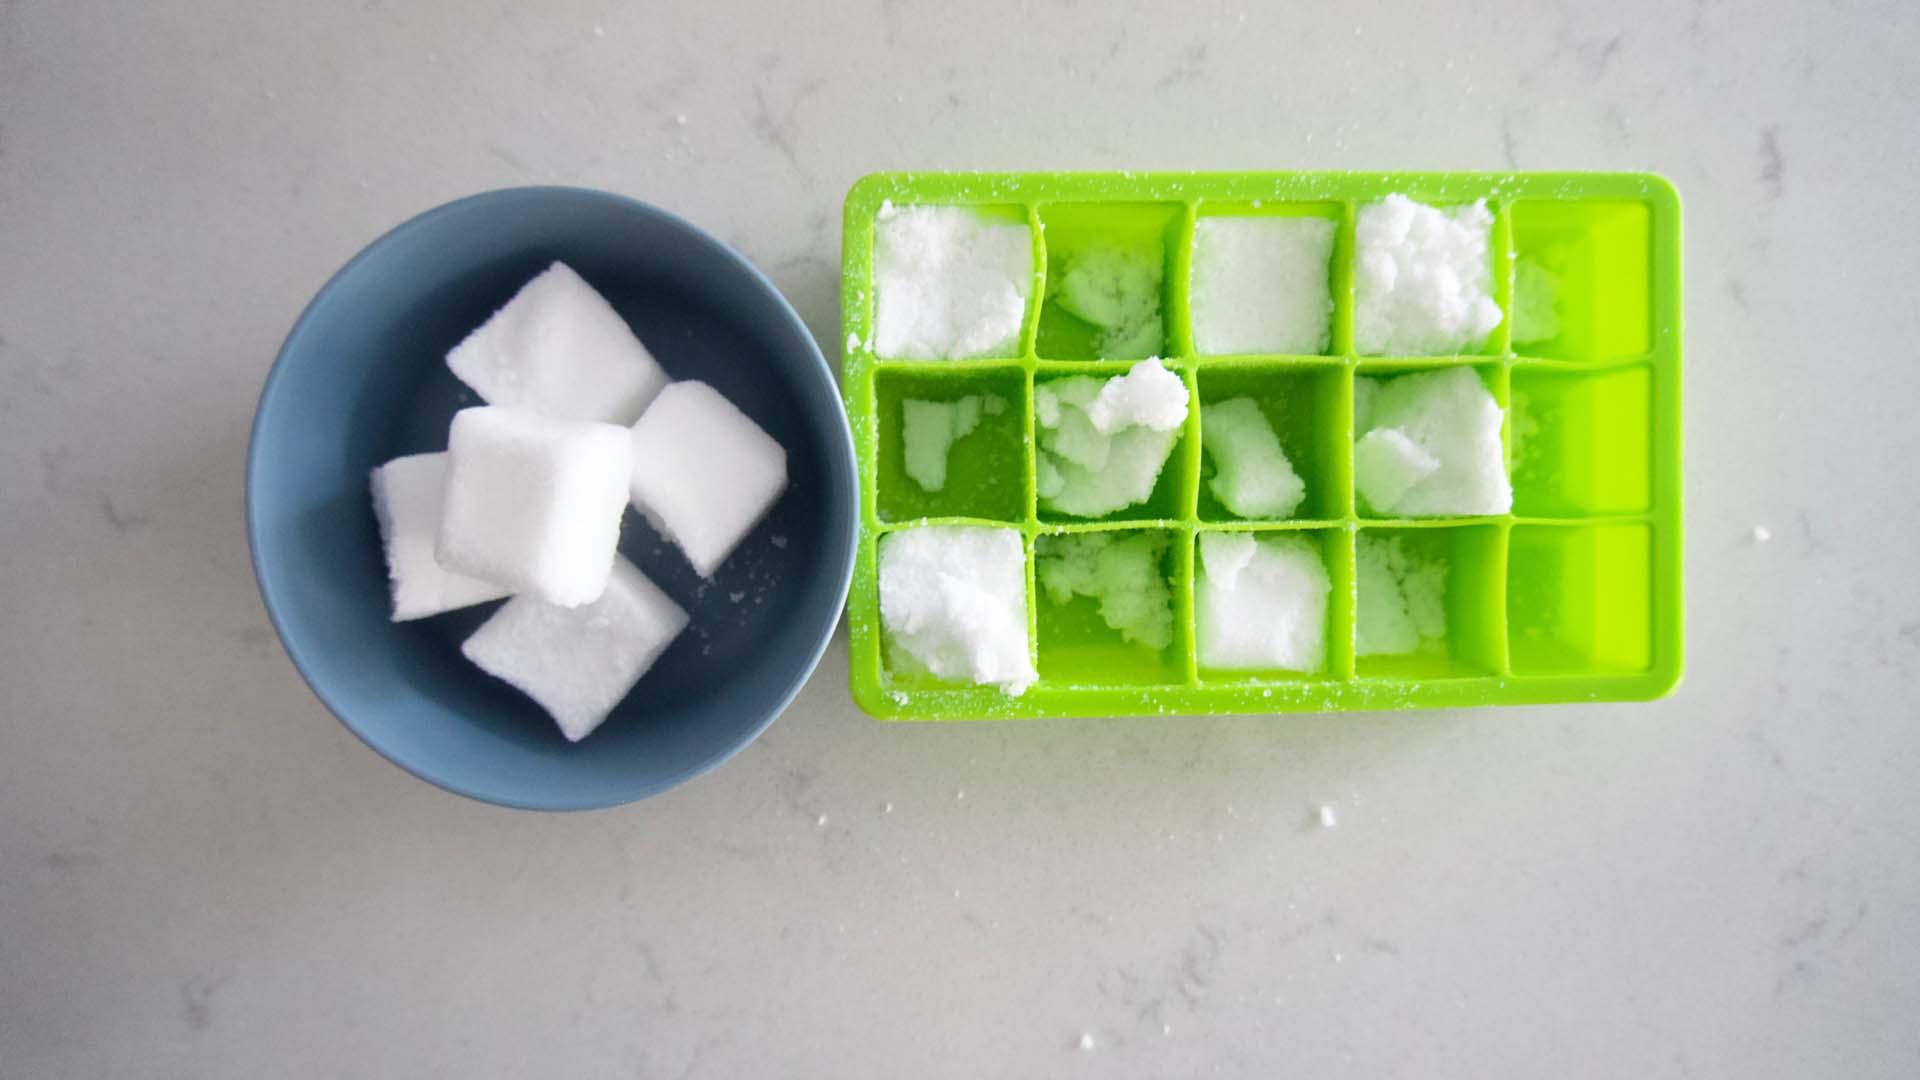 A bowl full of toilet bomb cubes next to a partially emptied ice cube tray